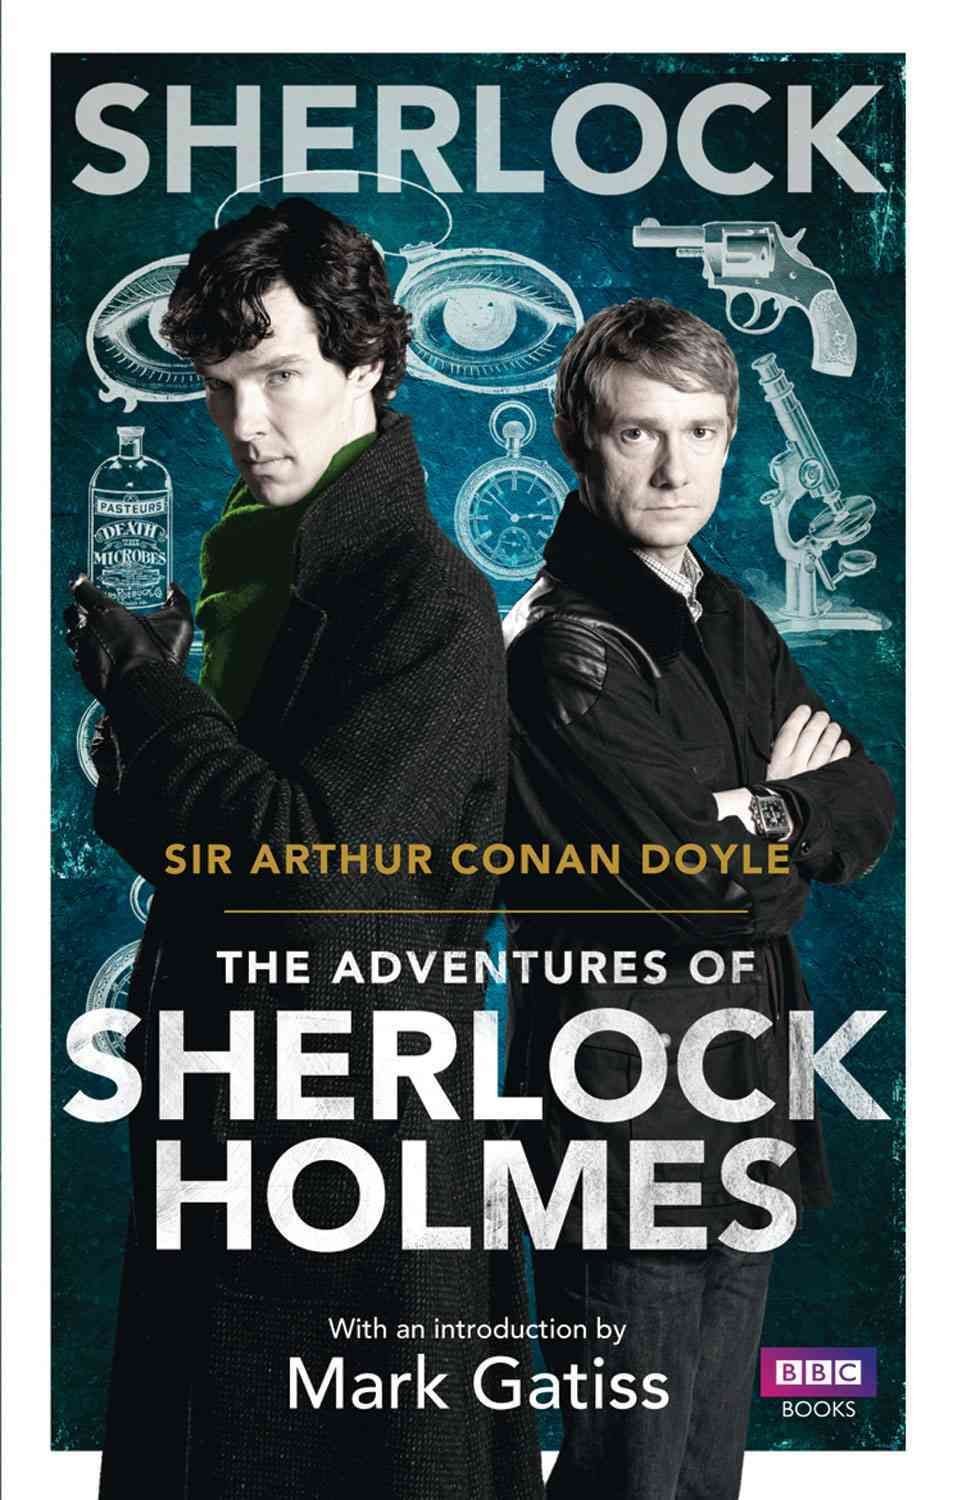 Free　of　Conan　Adventures　Arthur　The　by　With　Sherlock　Sherlock:　Buy　Delivery　Holmes　Doyle